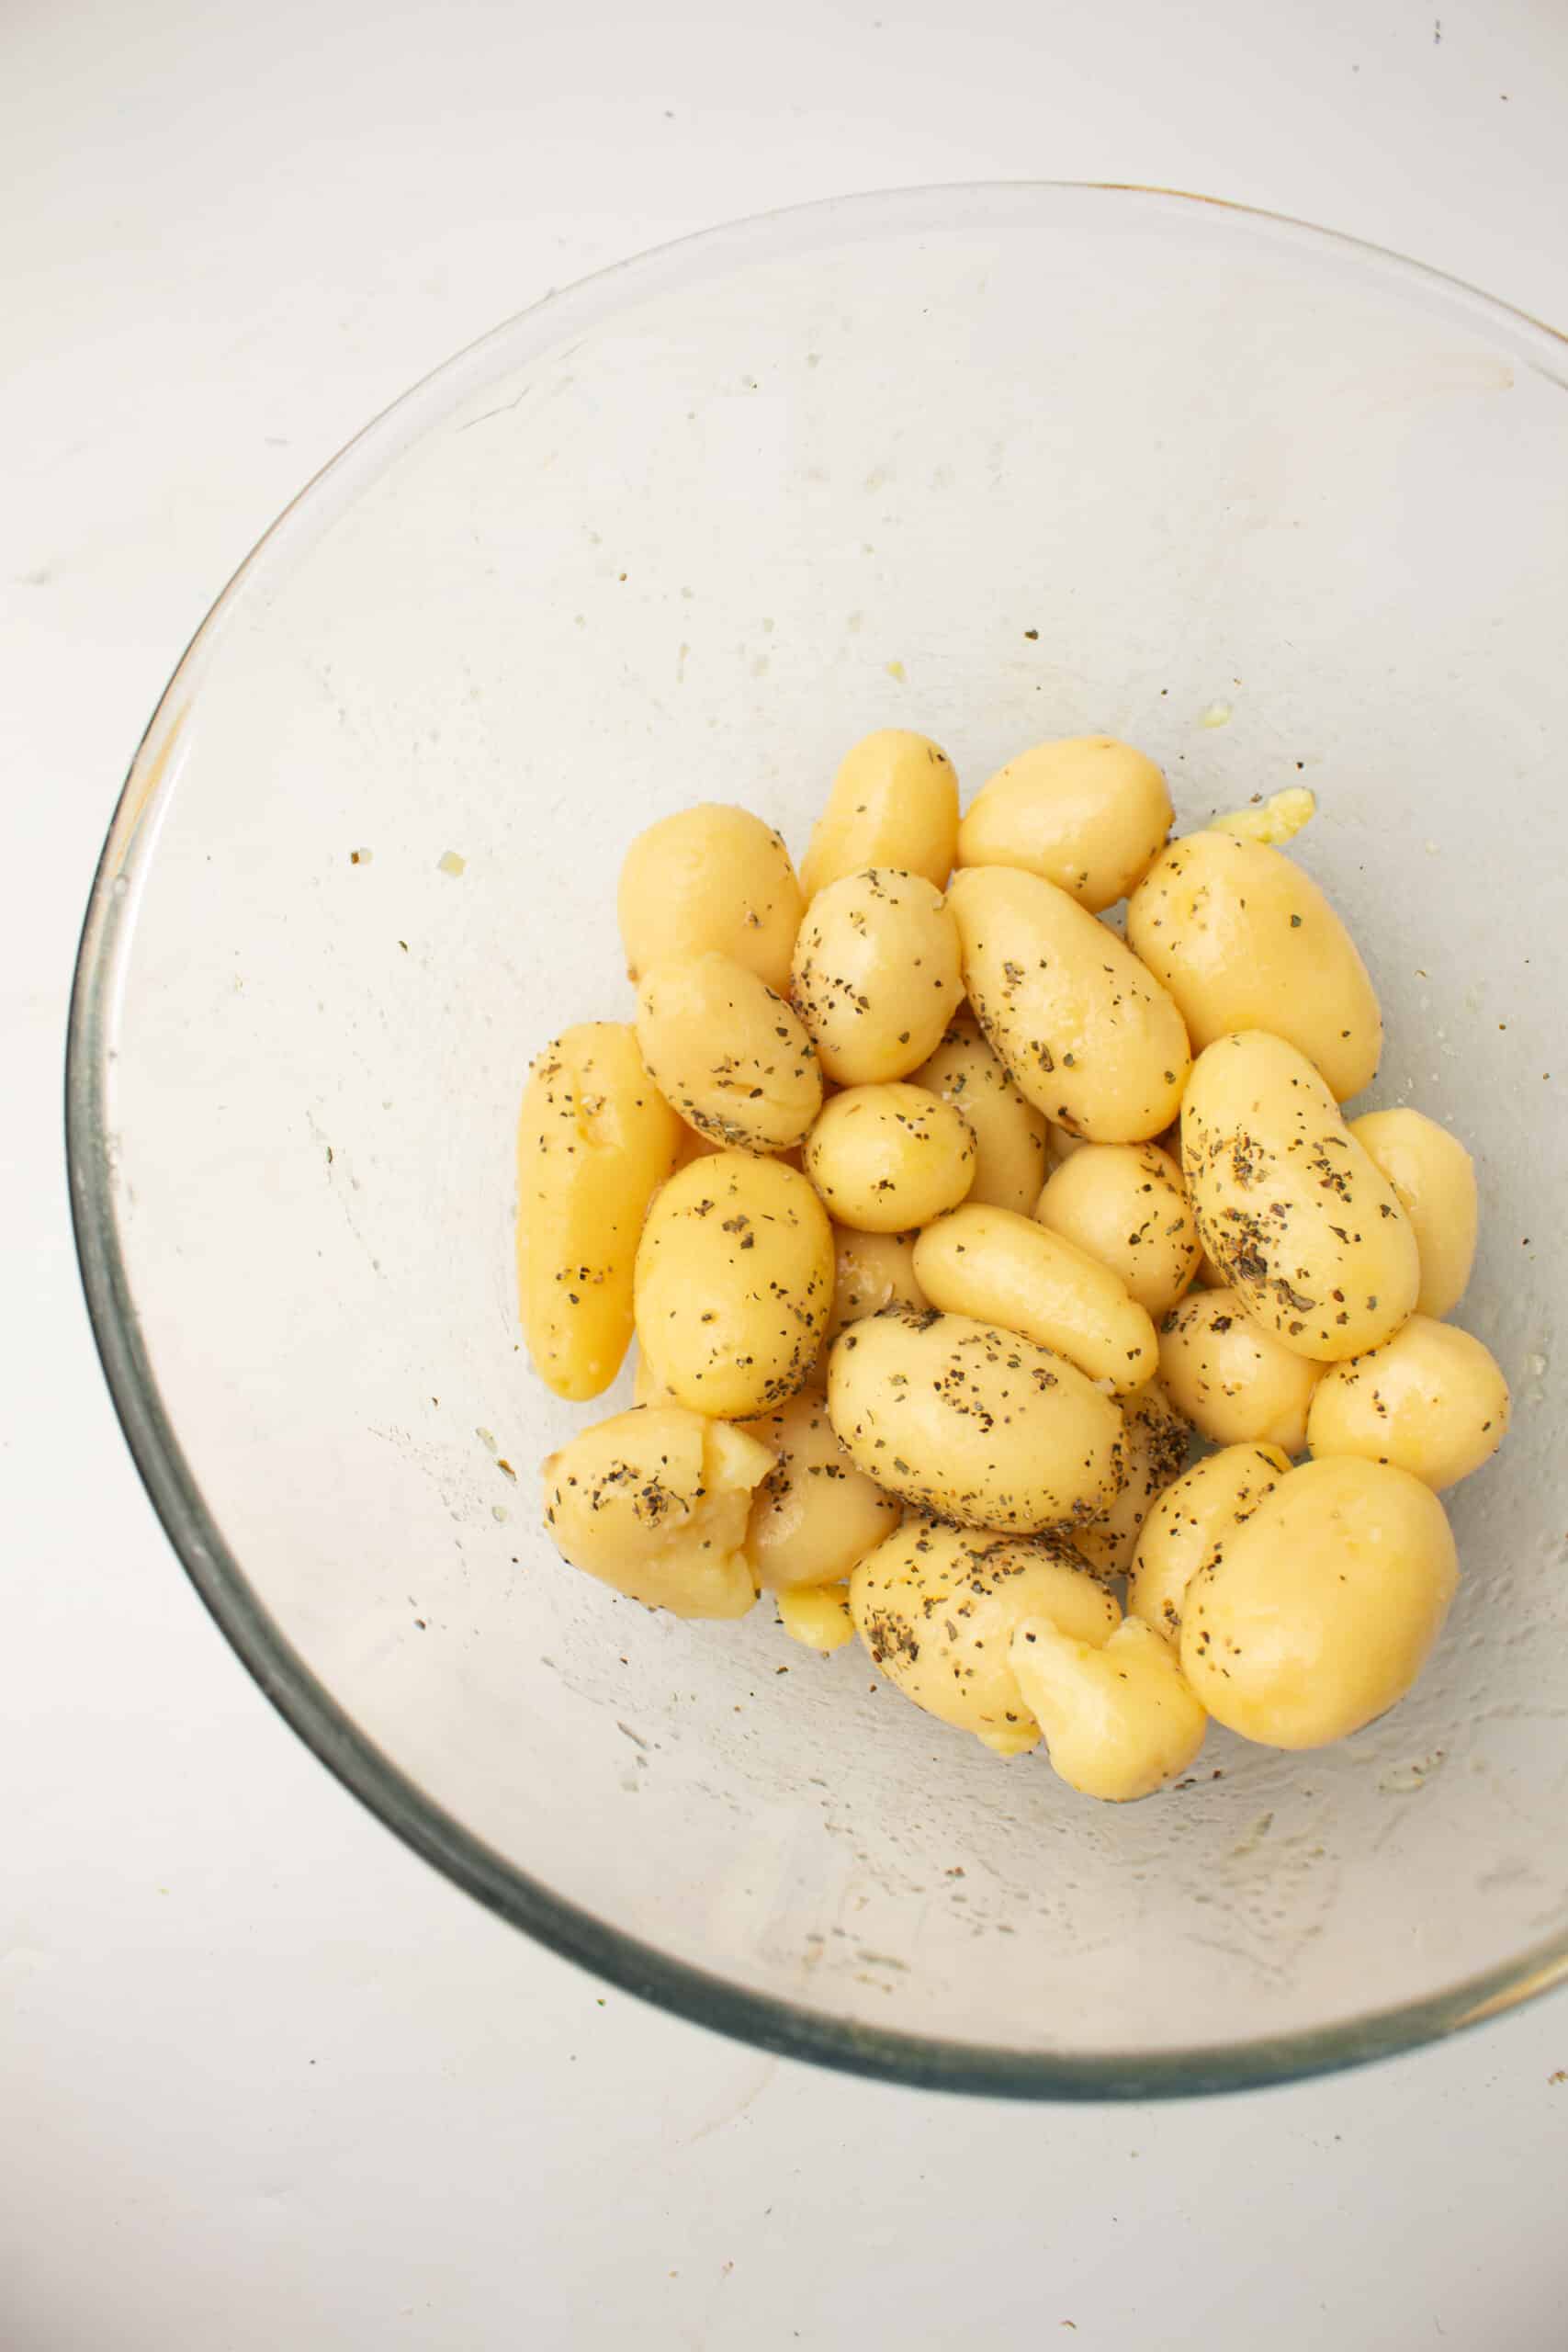 Tinned potatoes in the mixing bowl
